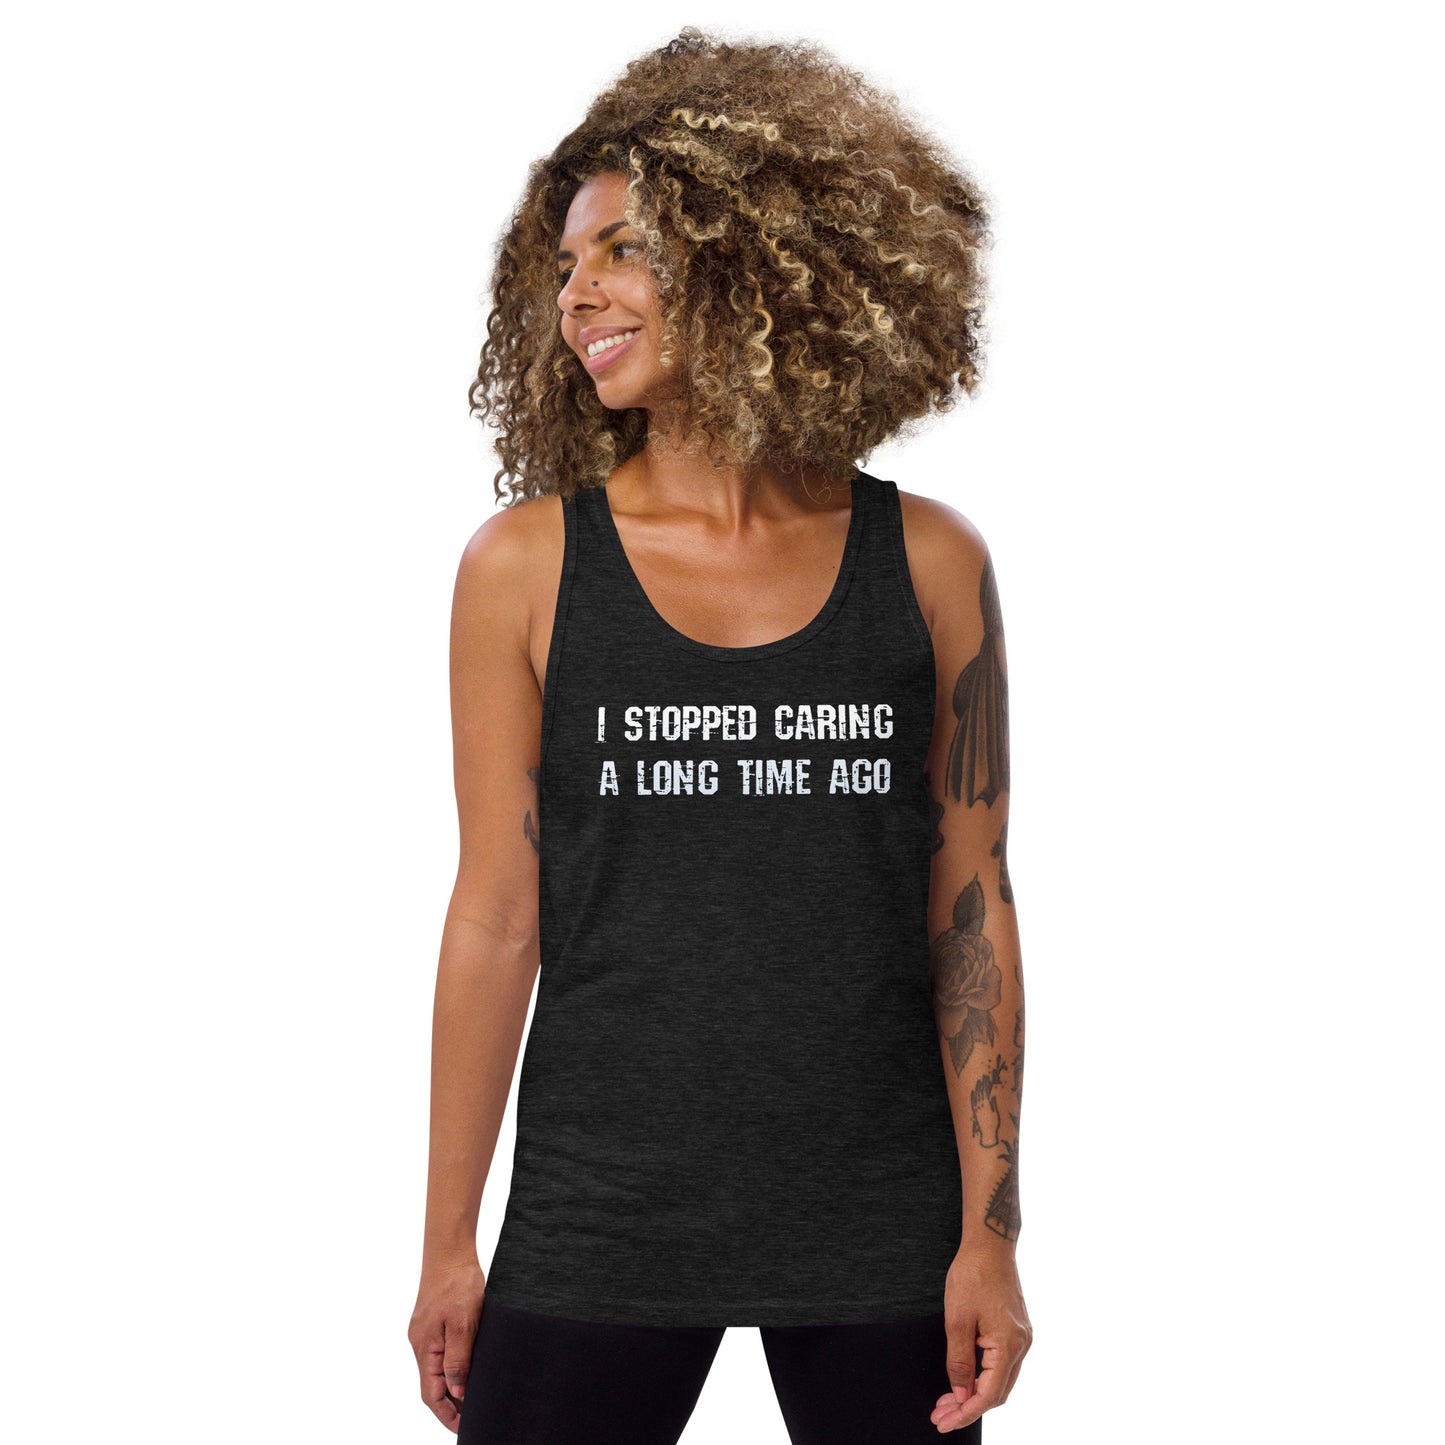 Tank Top - "I Stopped Caring A Long Time Ago"